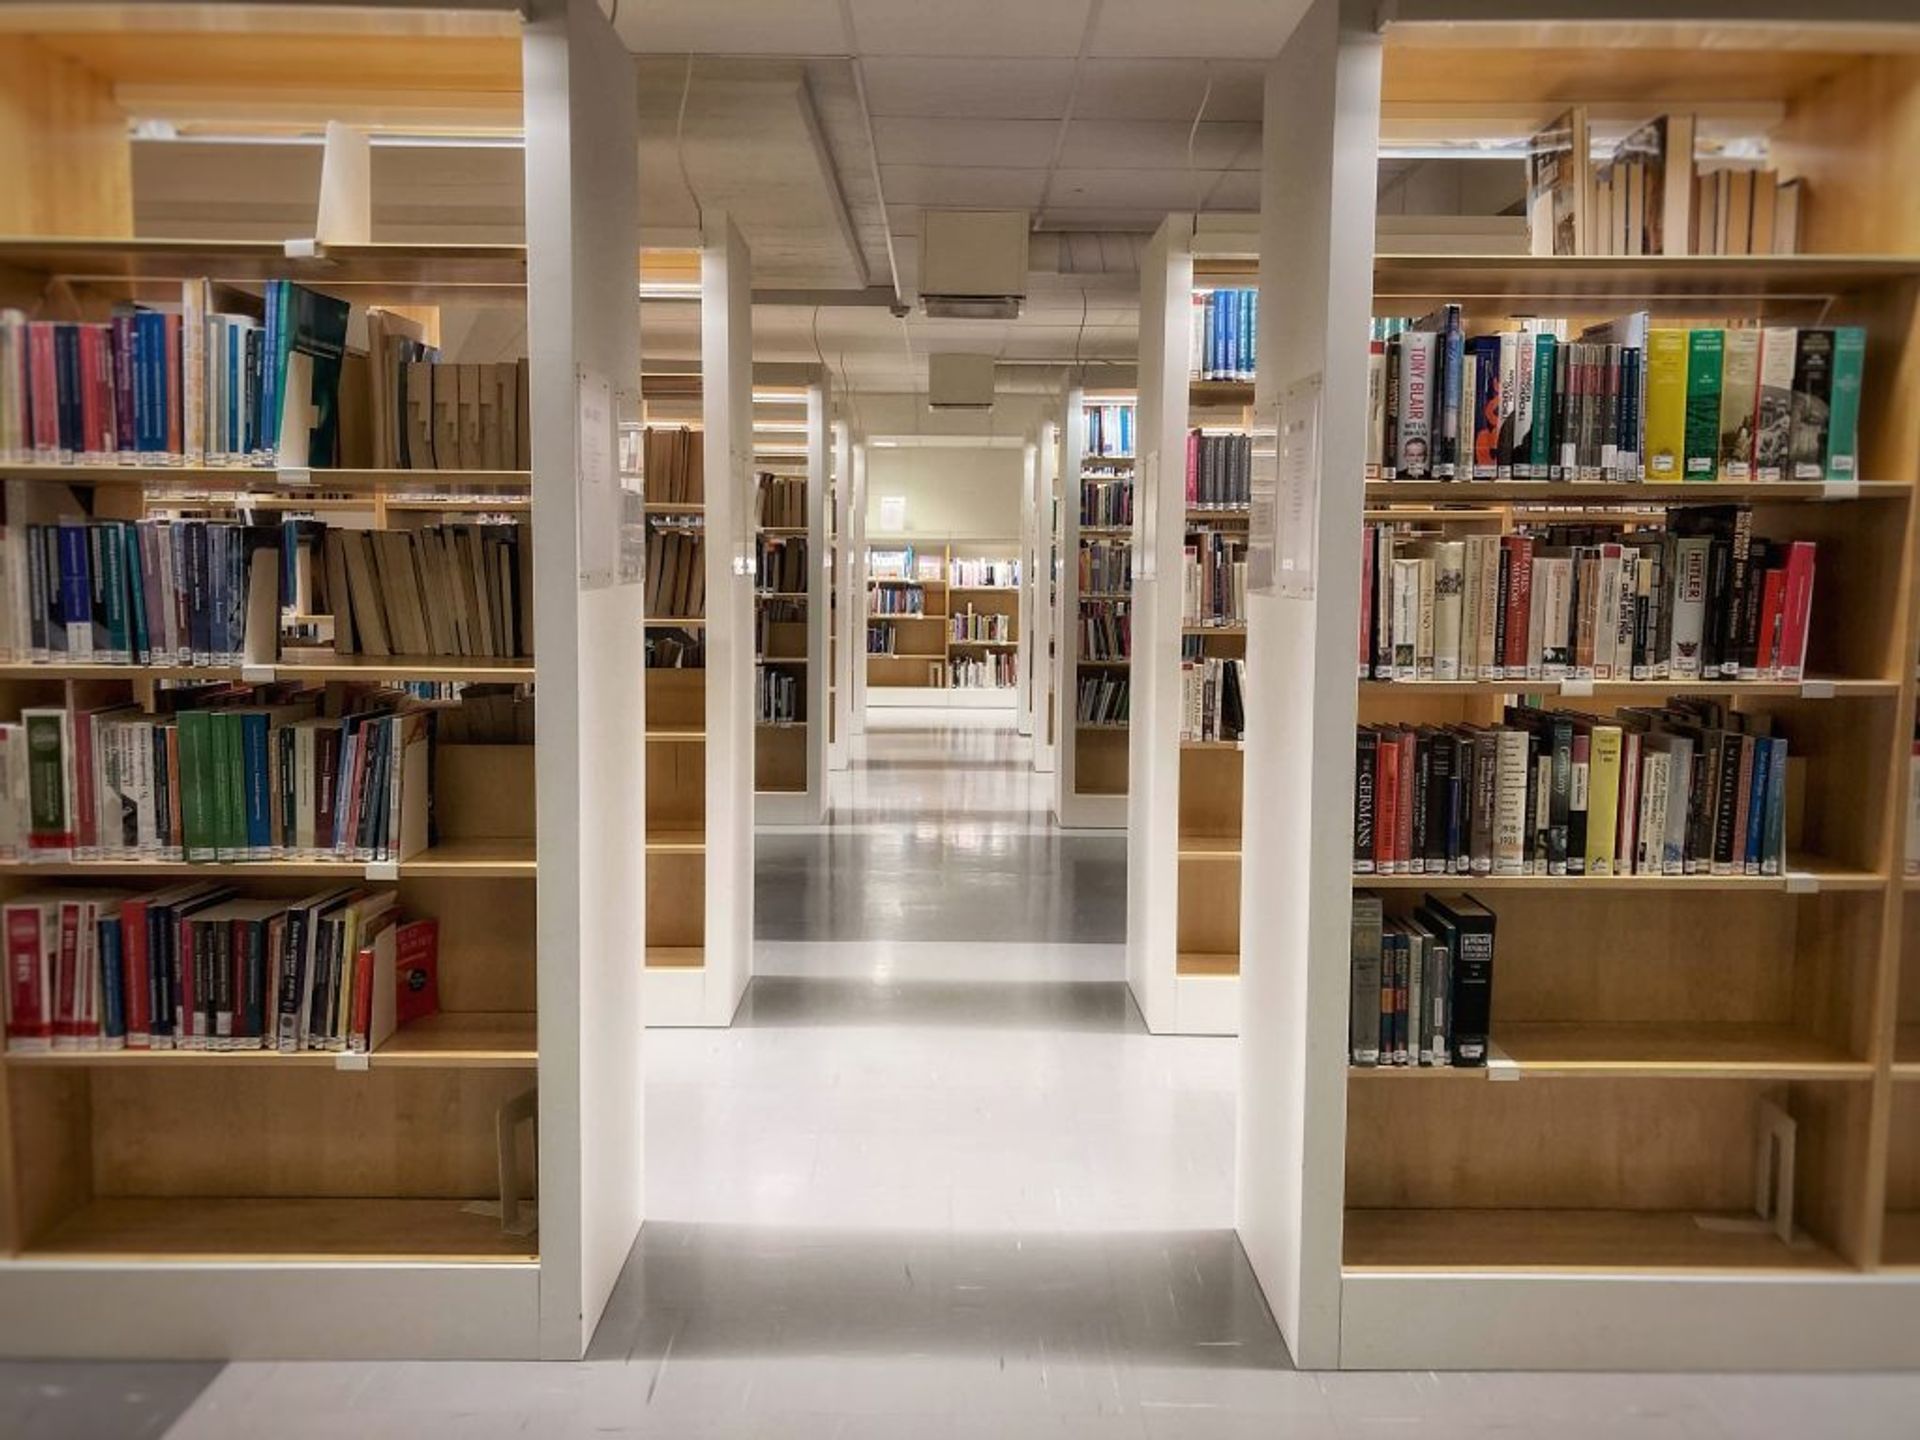 A corridor in the library showing many shelves with books. 